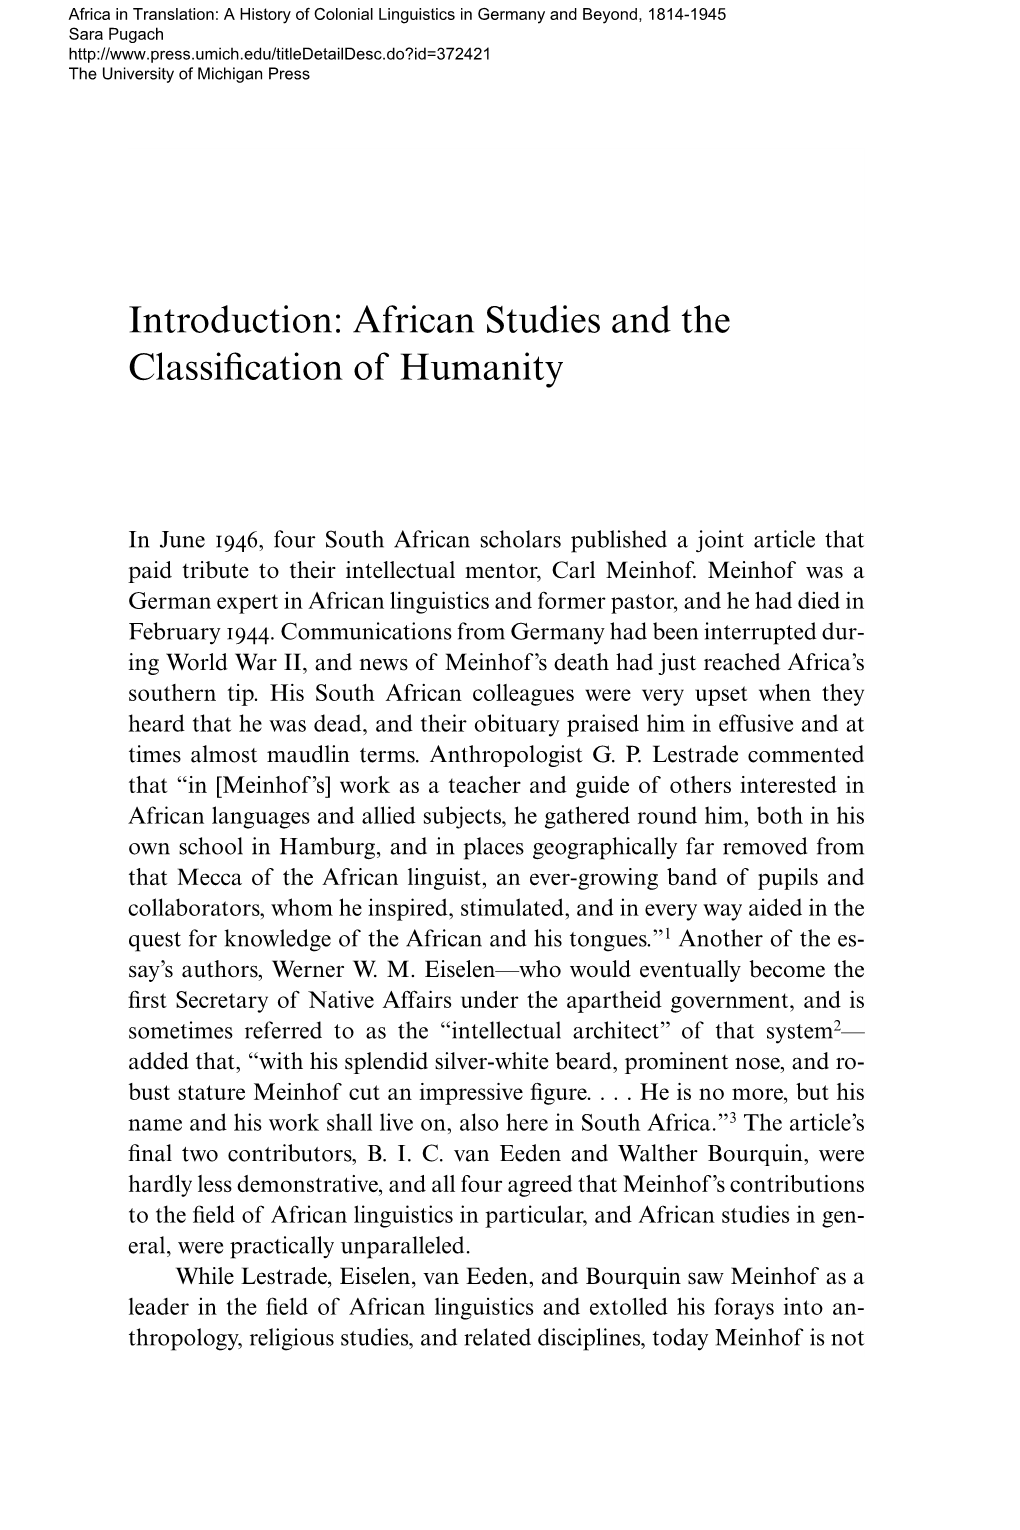 African Studies and the Classification of Humanity